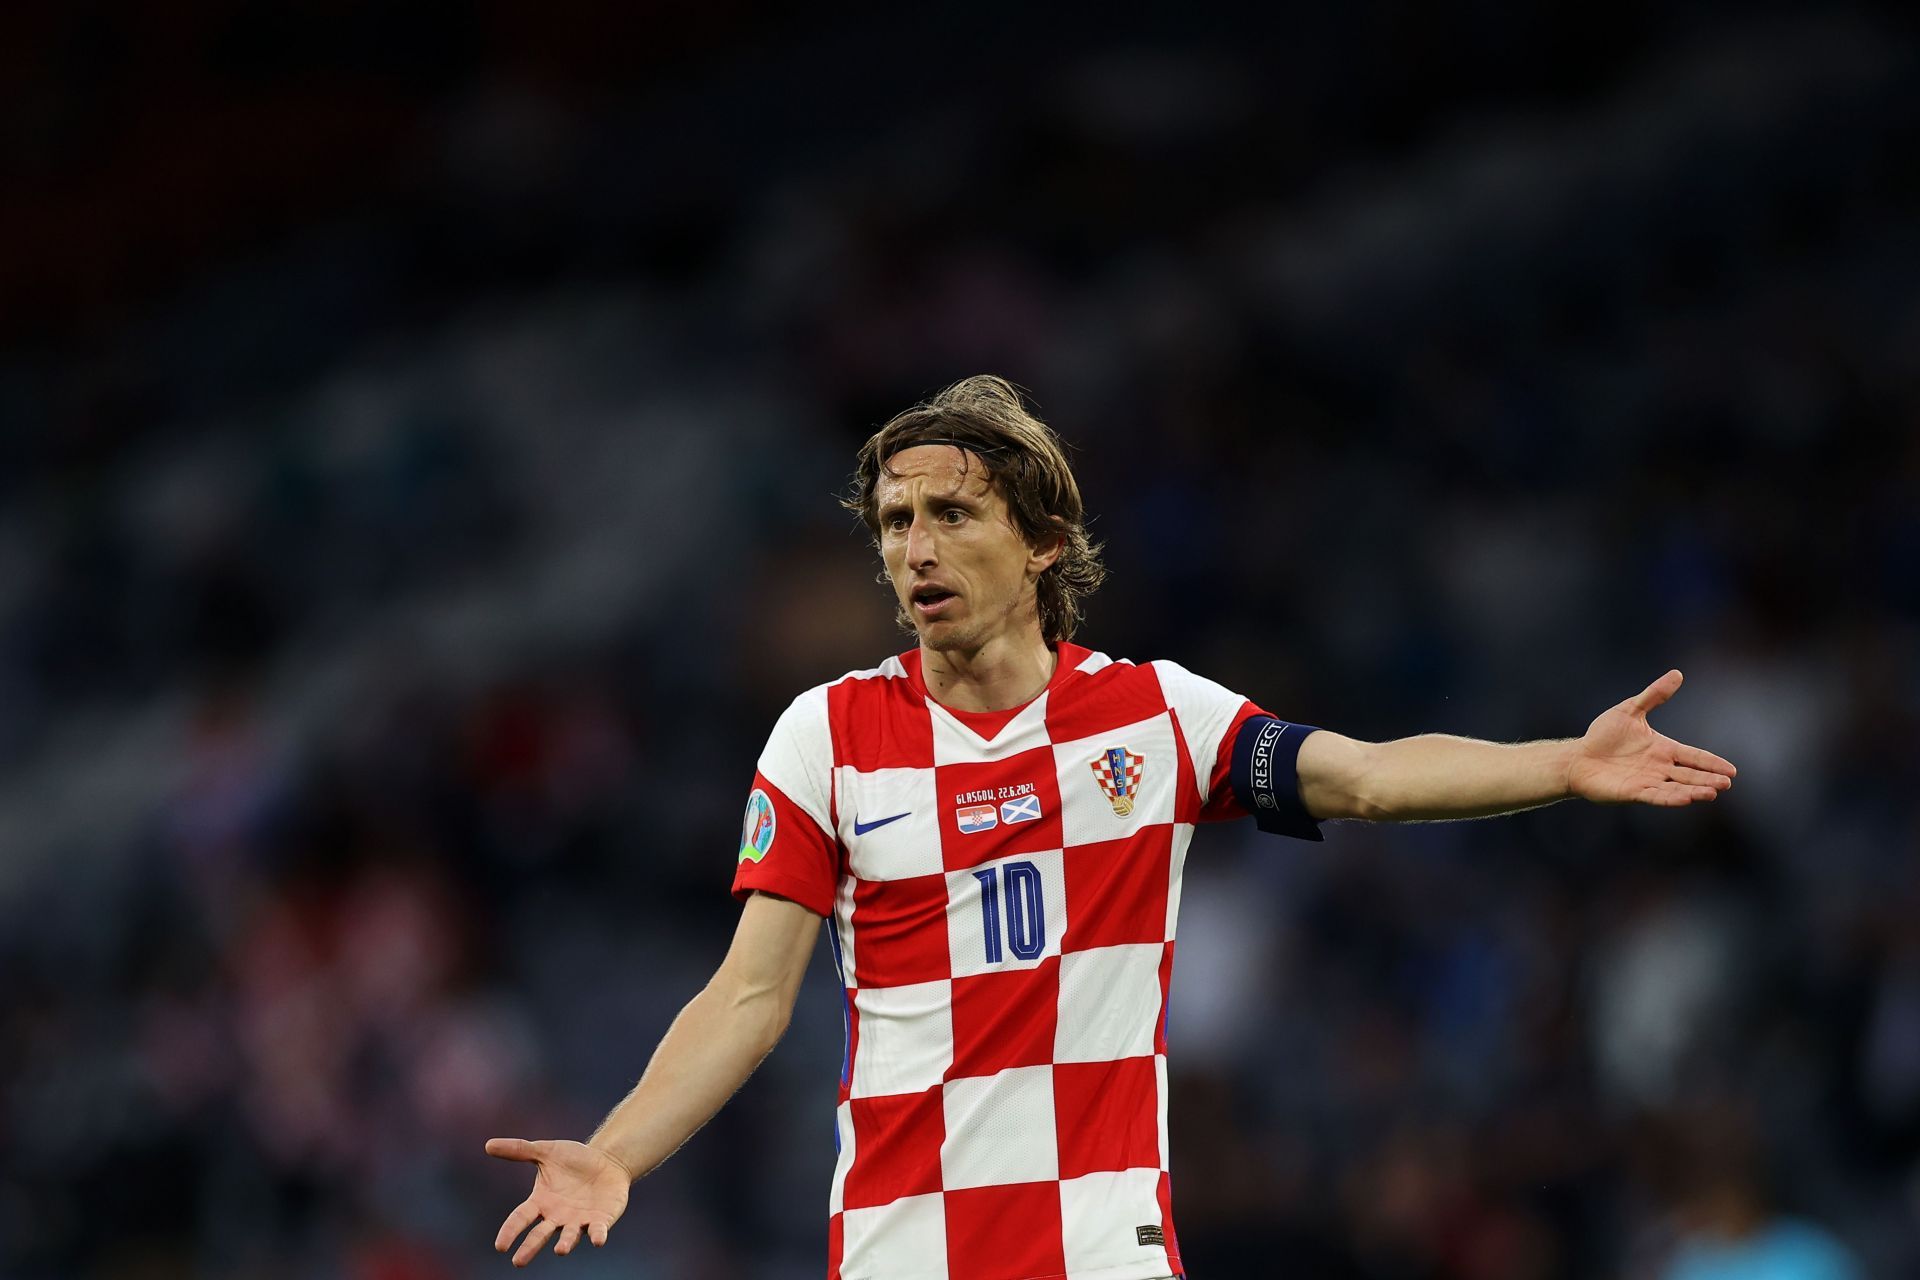 The Croatian midfielder was instrumental for Real Madrid and his nation in 2018 - but was it really enough to win the Ballon d&#039;Or?